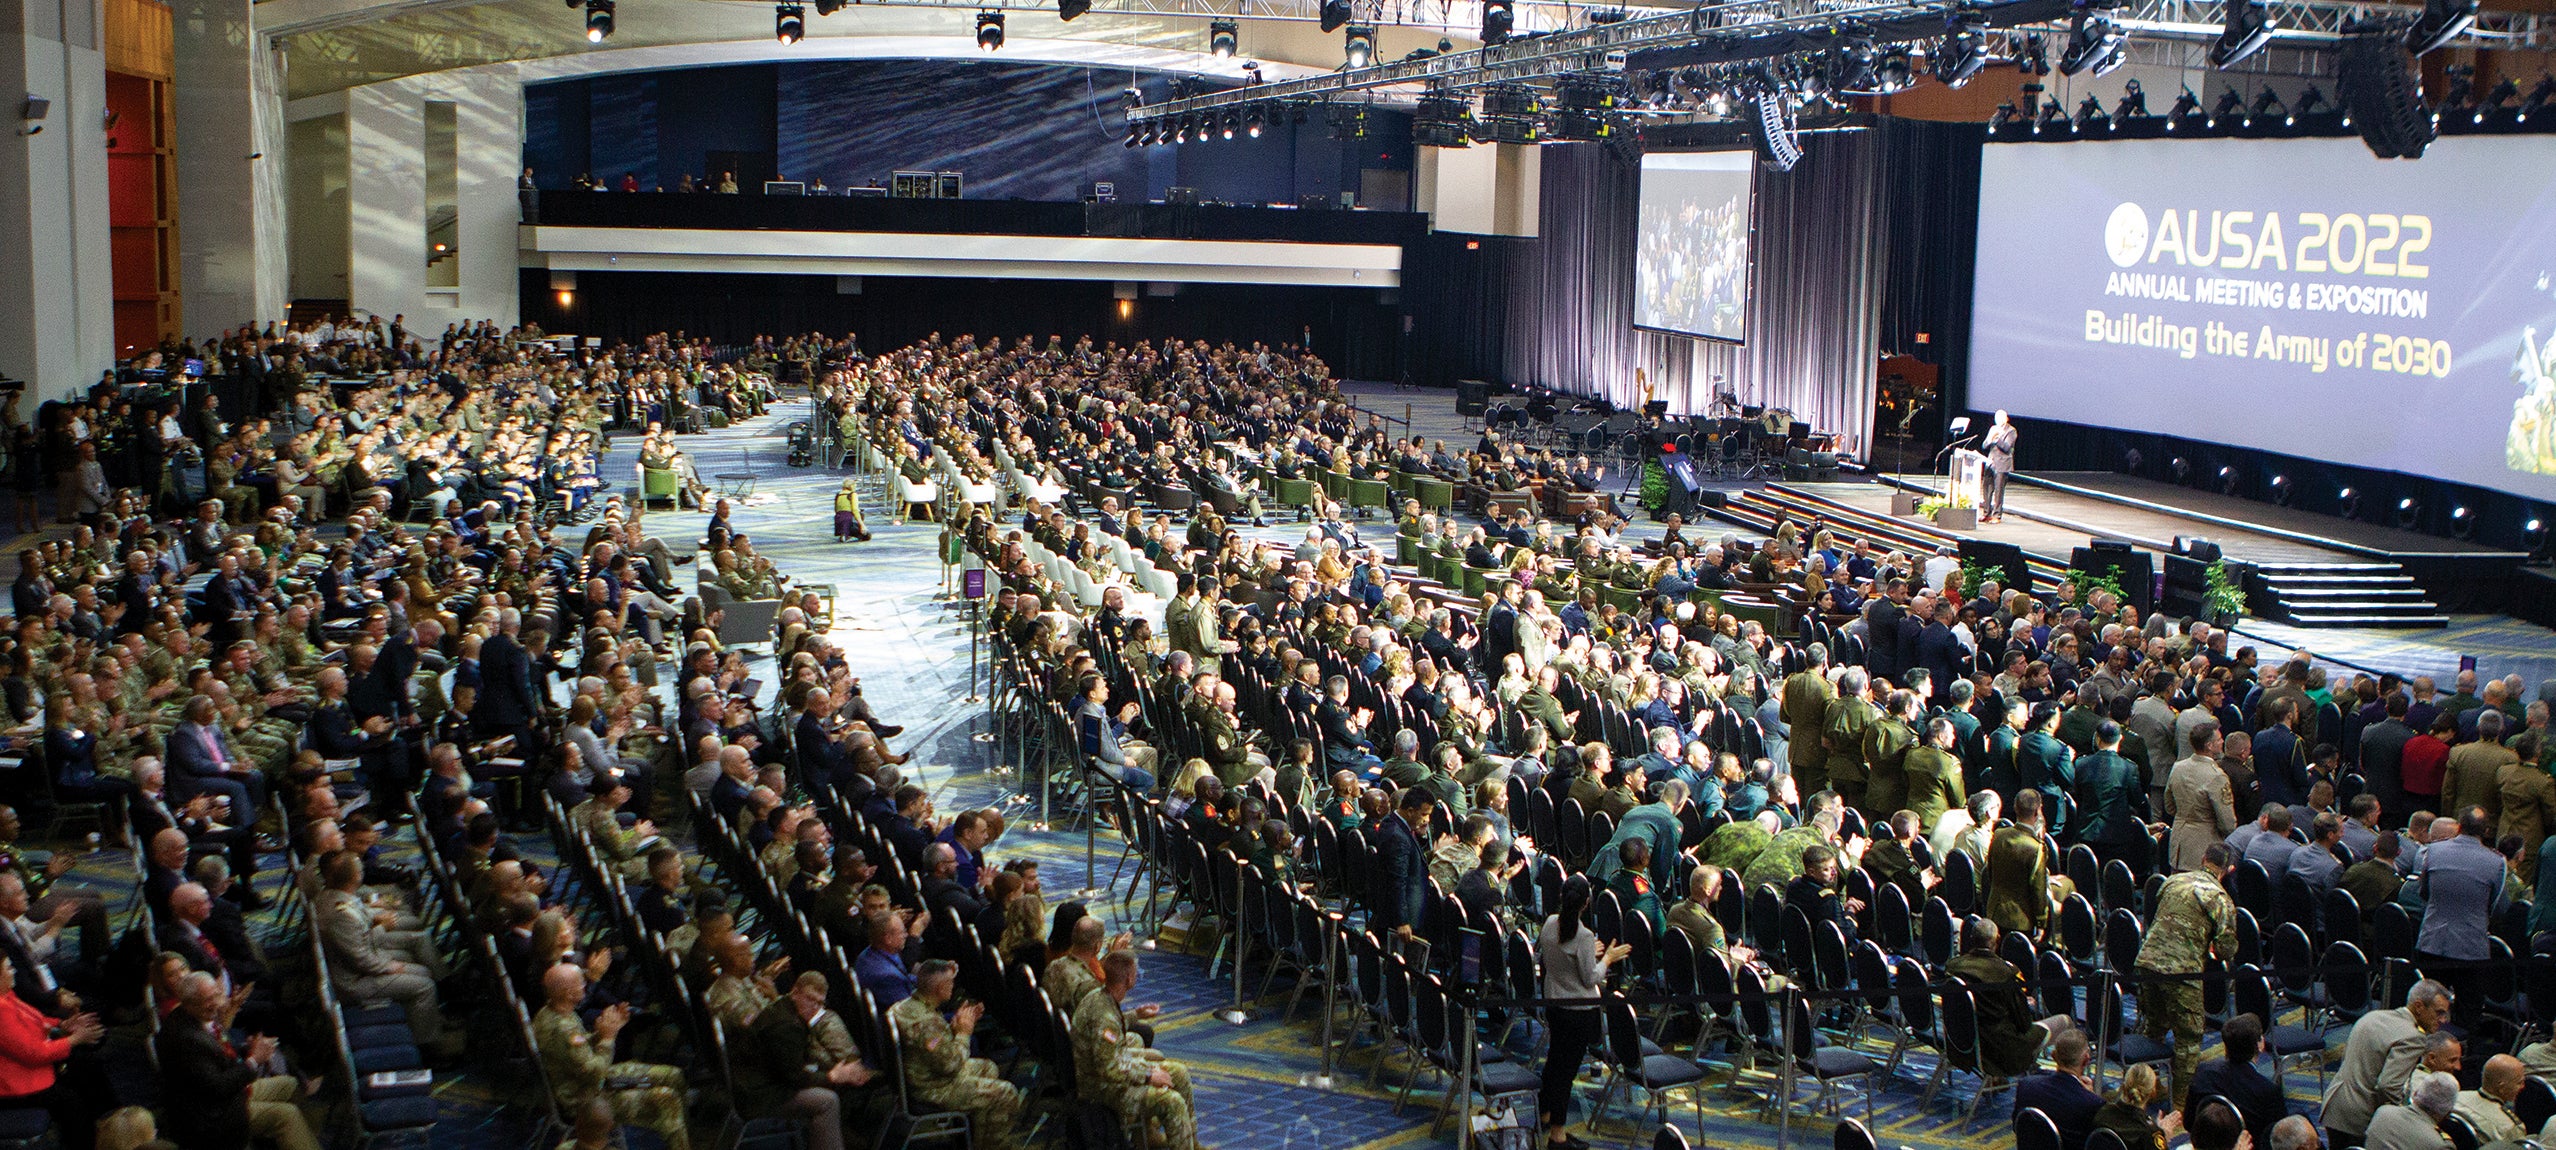 Retired Gen. Bob Brown, president and CEO of the Association of the U.S. Army, speaks during the opening ceremony of the 2022 AUSA Annual Meeting and Exposition in Washington, D.C. (Credit: U.S. Army Reserve/Staff Sgt. Chris Jackson)